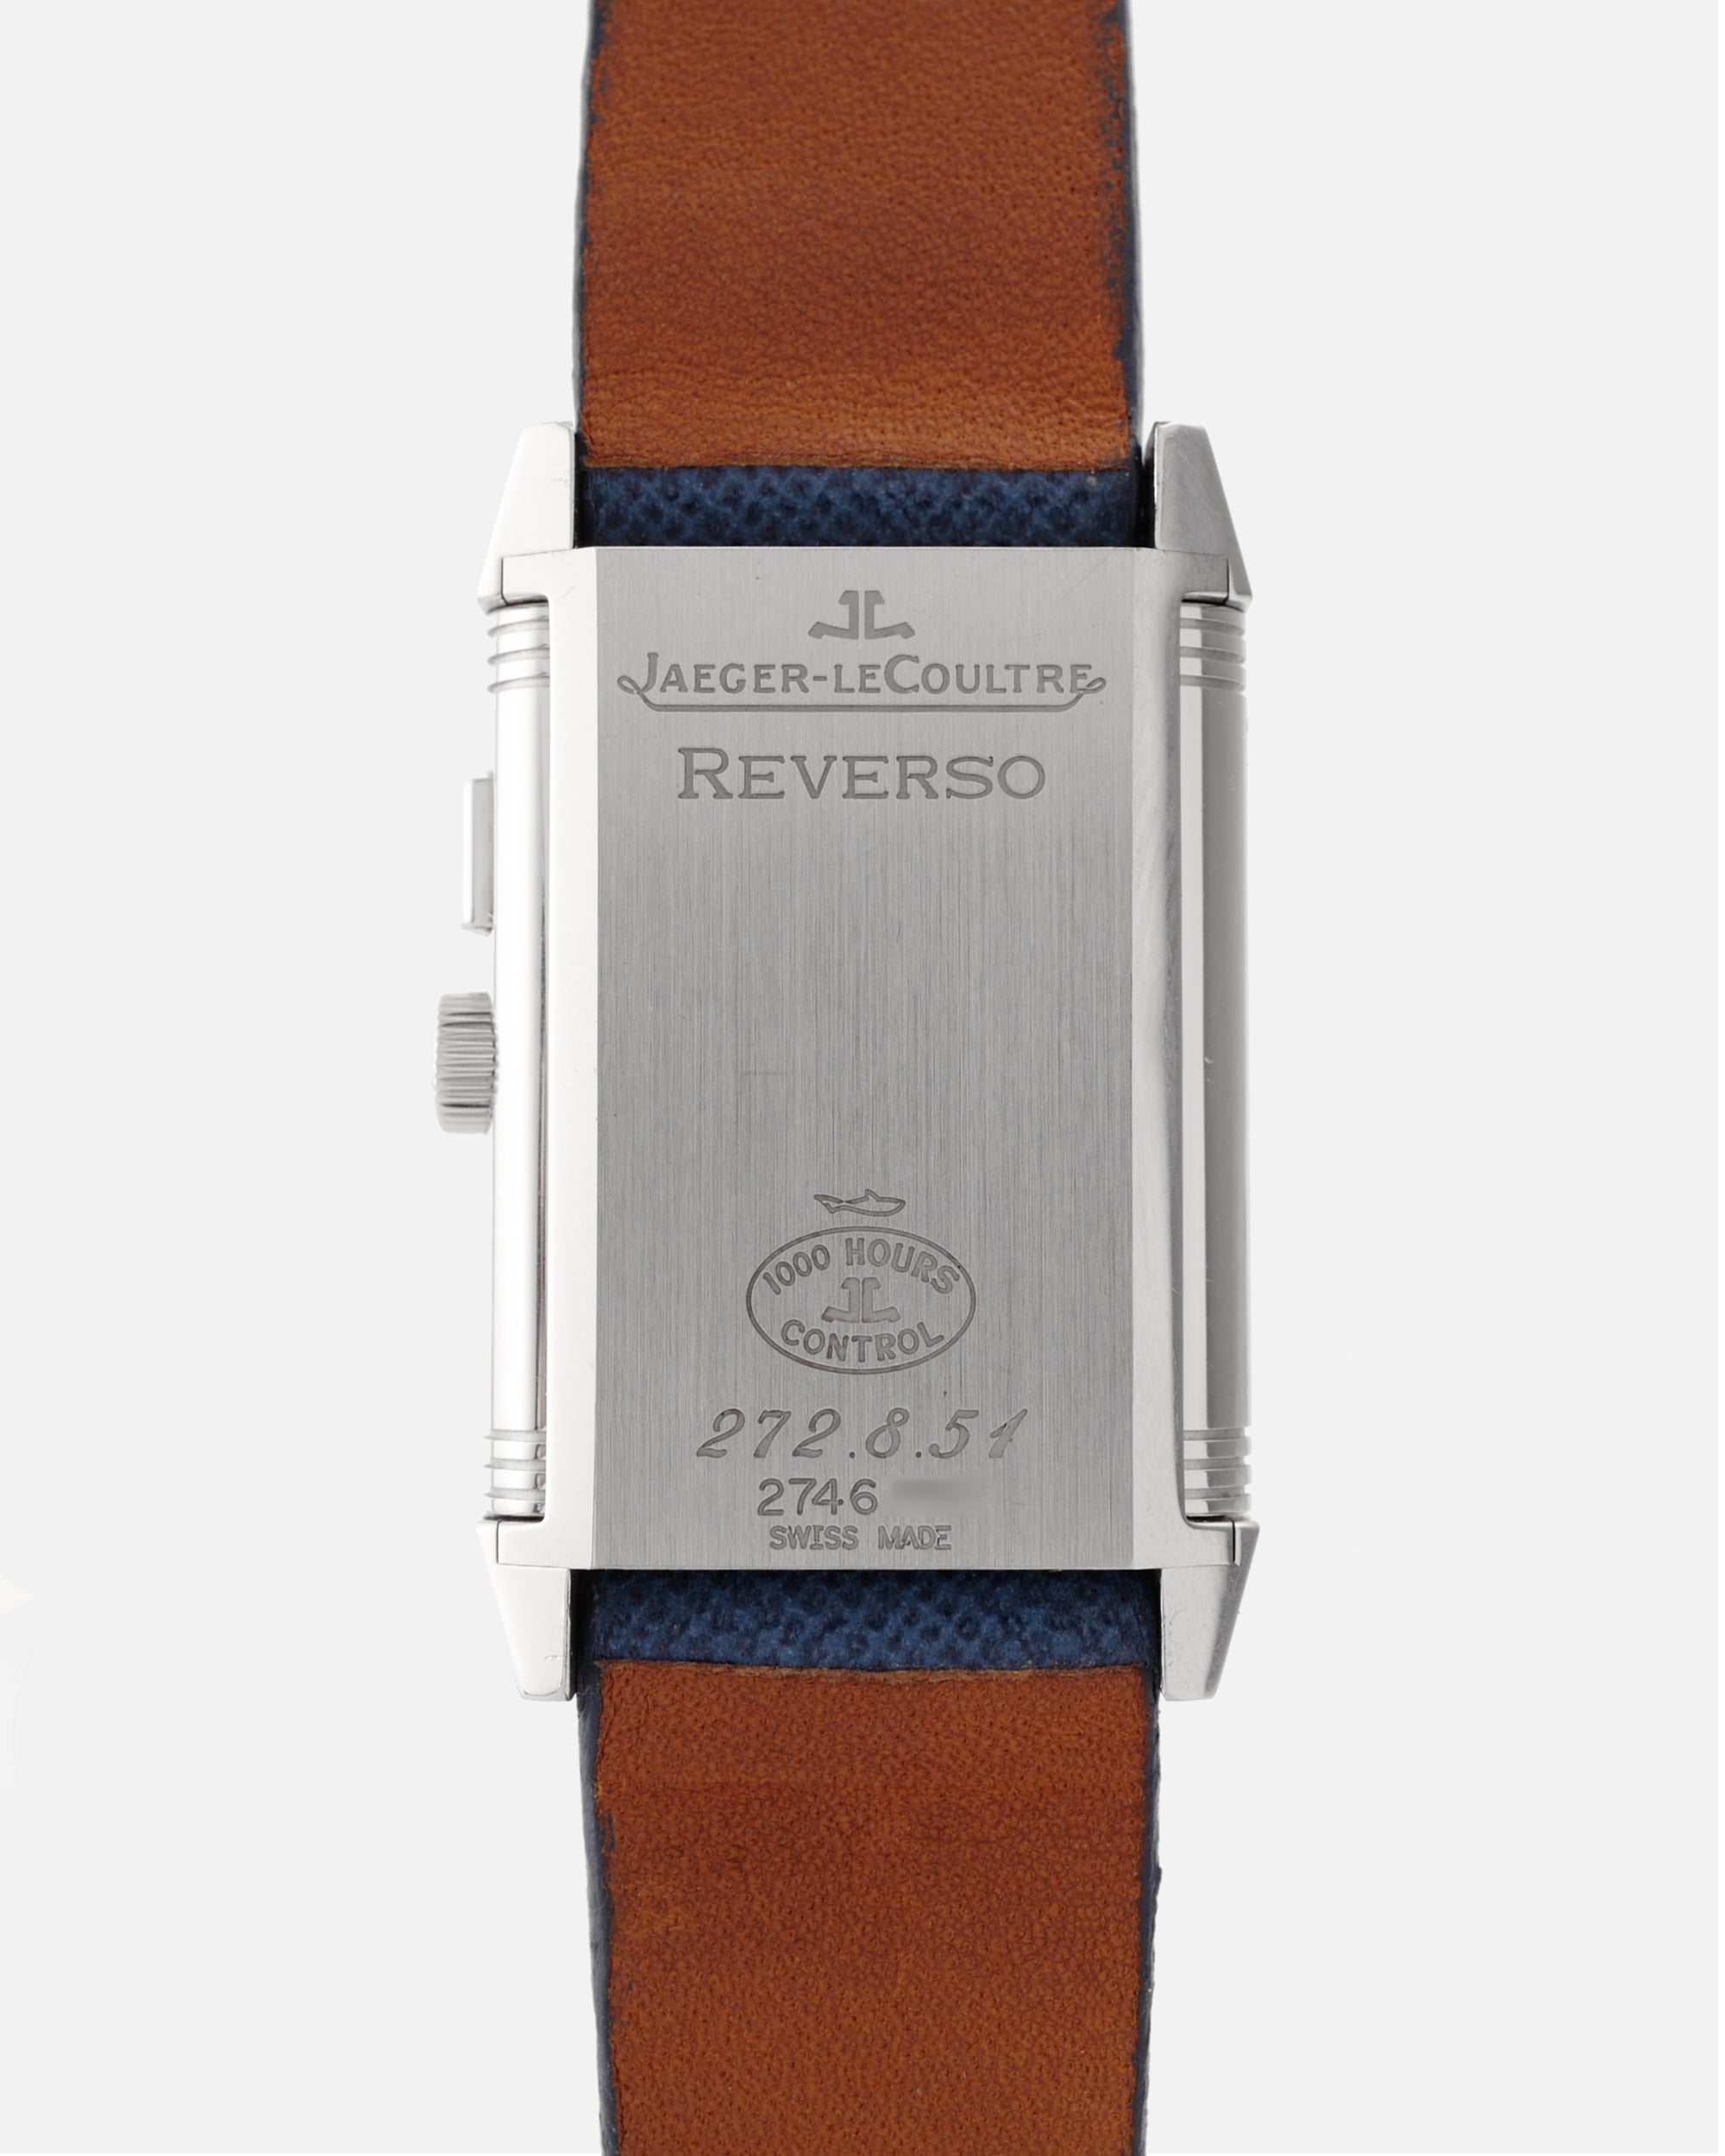 Jaeger LeCoultre Reverso Duoface Day-Night | Ref. 272.8.54